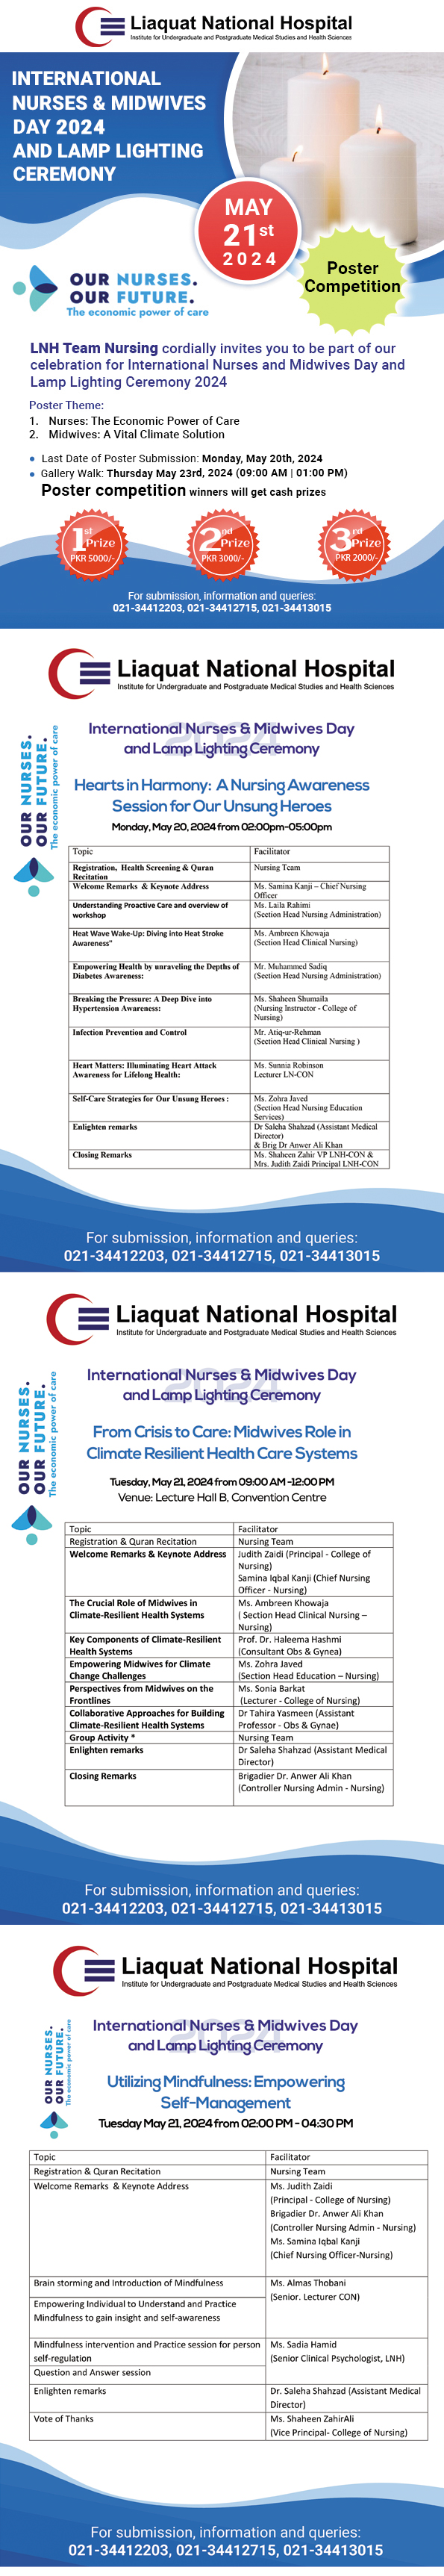 International Nurses and Midwives Day 2024 and Lamp-lighting Ceremony, May 20-21, 2024